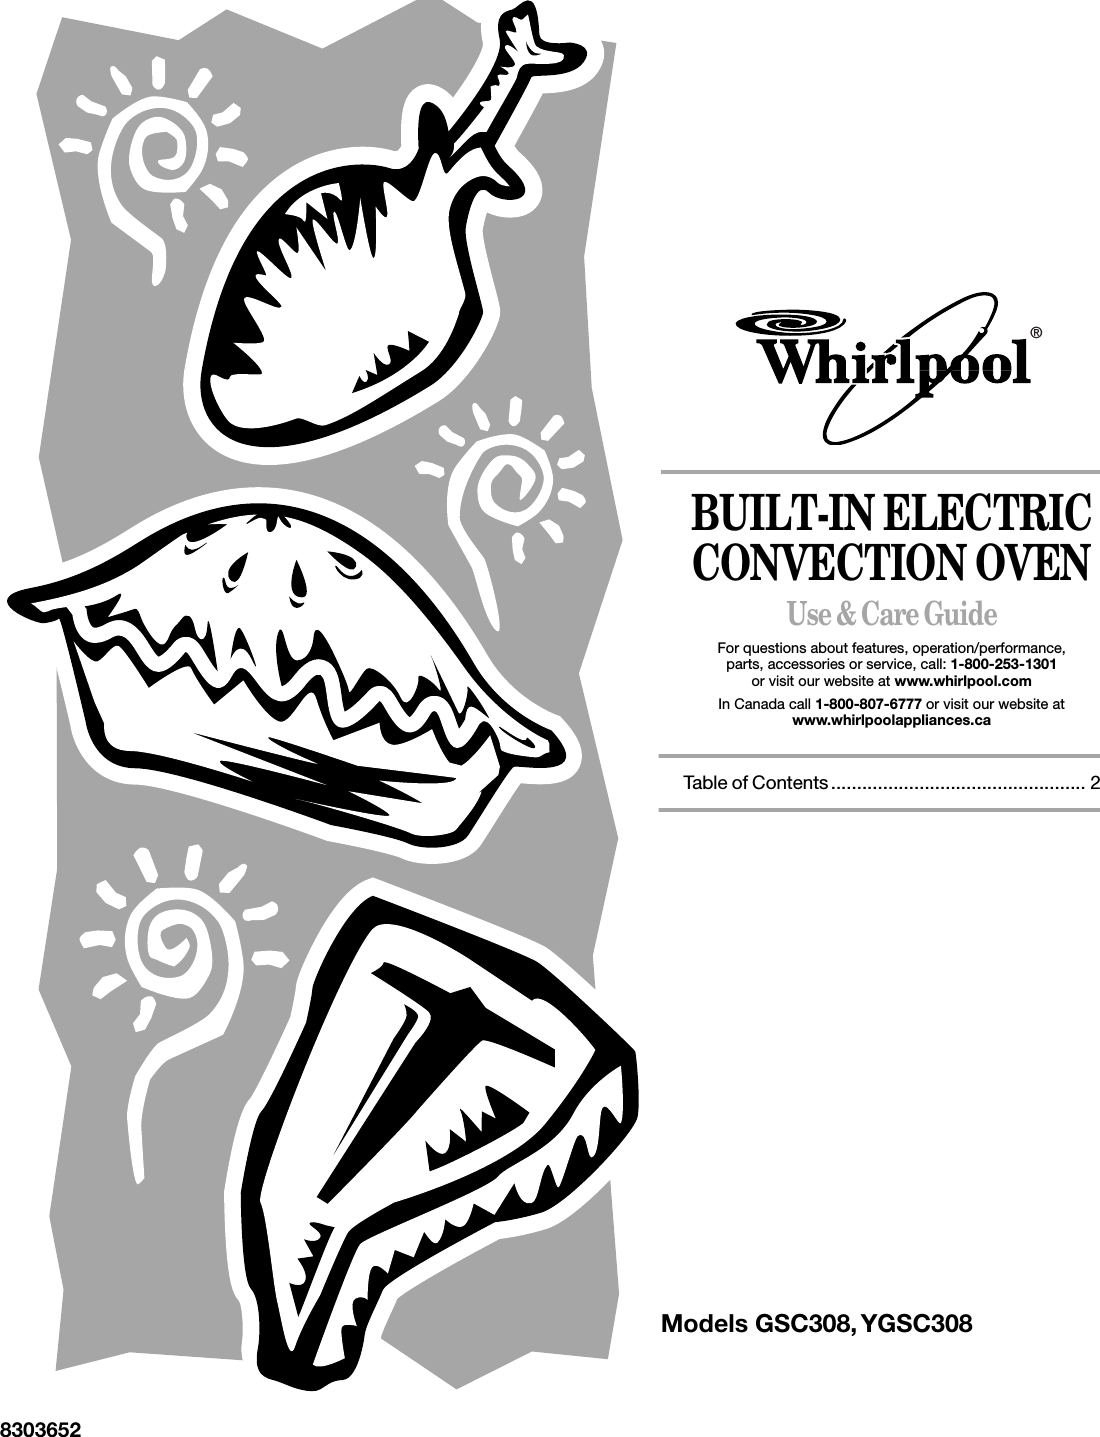 BUILT-IN ELECTRIC CONVECTION OVENUse &amp; Care GuideFor questions about features, operation/performance,parts, accessories or service, call: 1-800-253-1301or visit our website at www.whirlpool.com In Canada call 1-800-807-6777 or visit our website at www.whirlpoolappliances.caTable of Contents................................................. 28303652®M o d e l s   GS C 3 0 8 ,  YG S C 3 0 8                                            